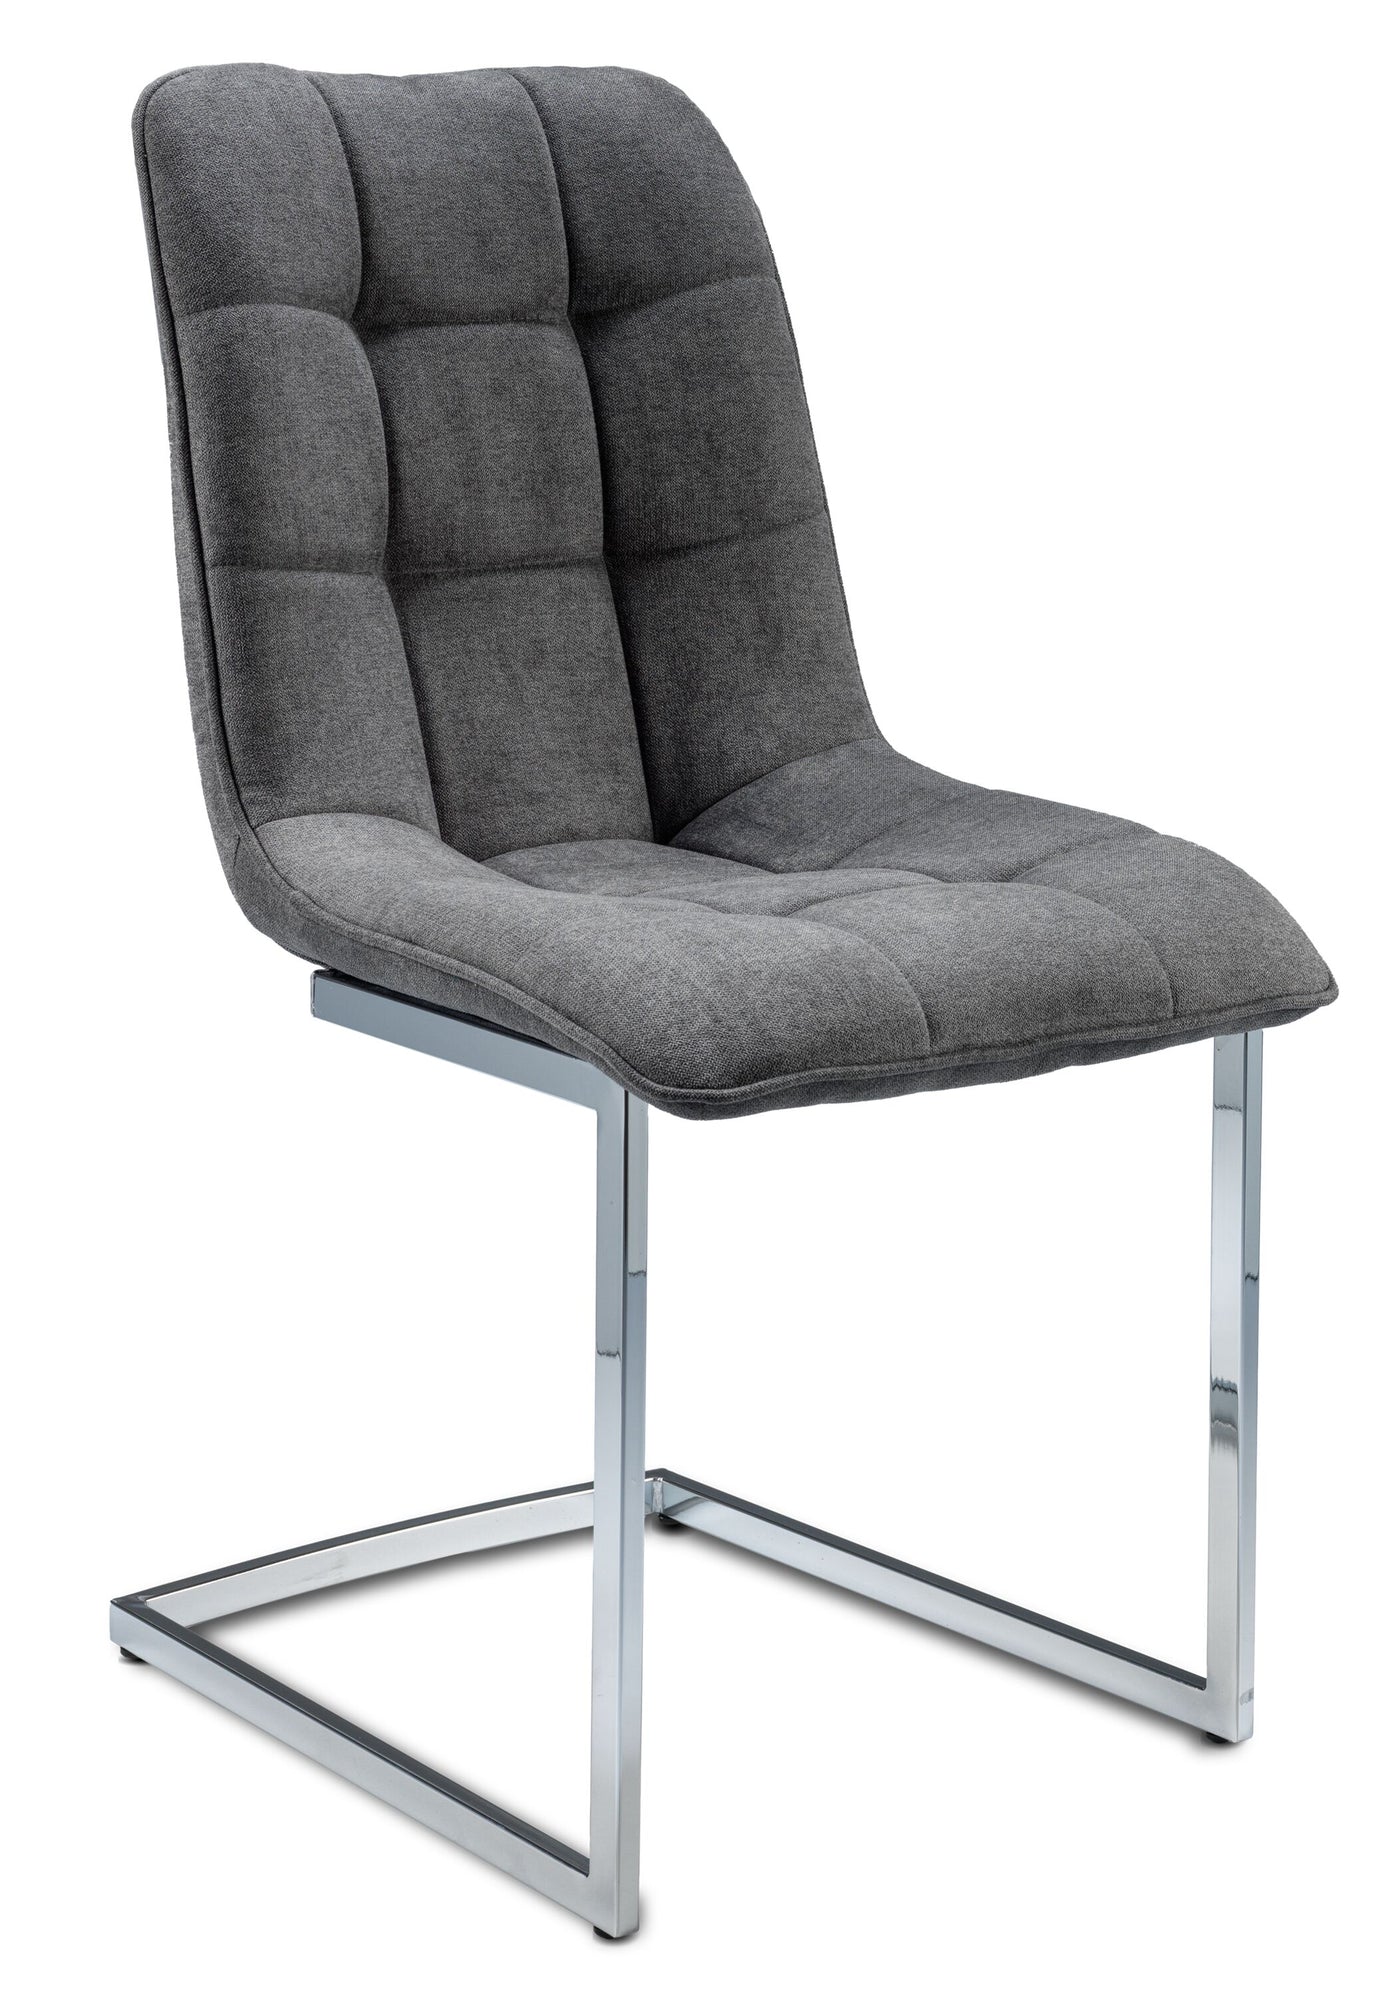 Tina Side Chair - Graphite